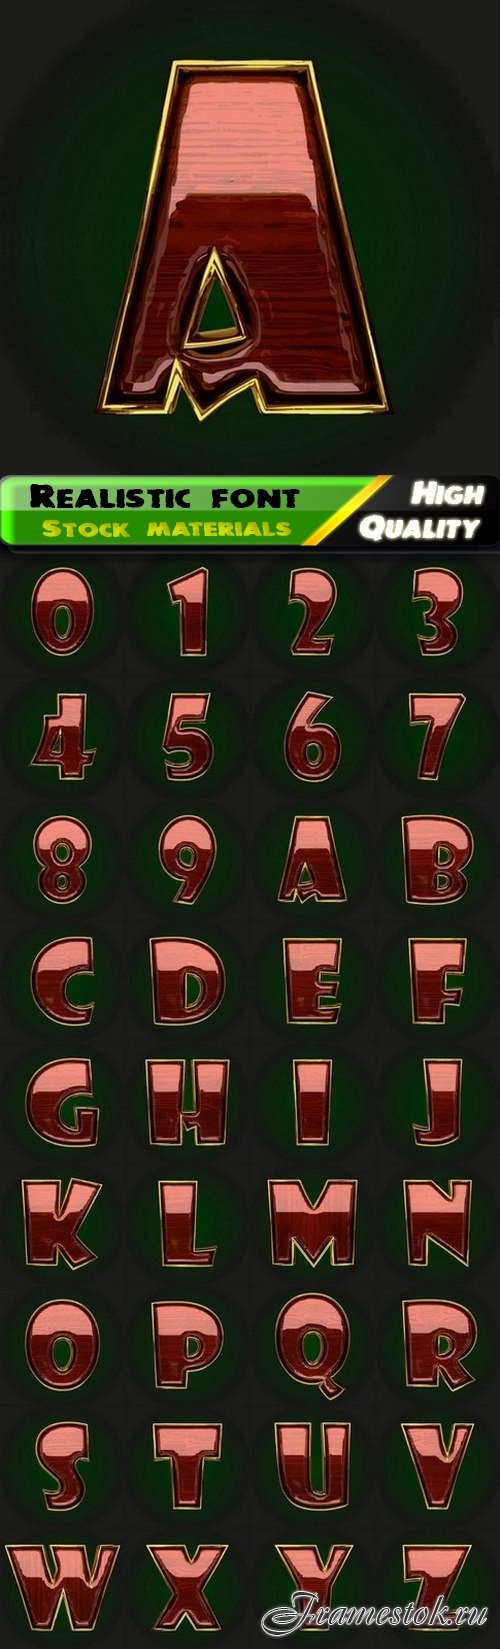 Realistic font and gold letter with number with red glossy wood - 36 Eps